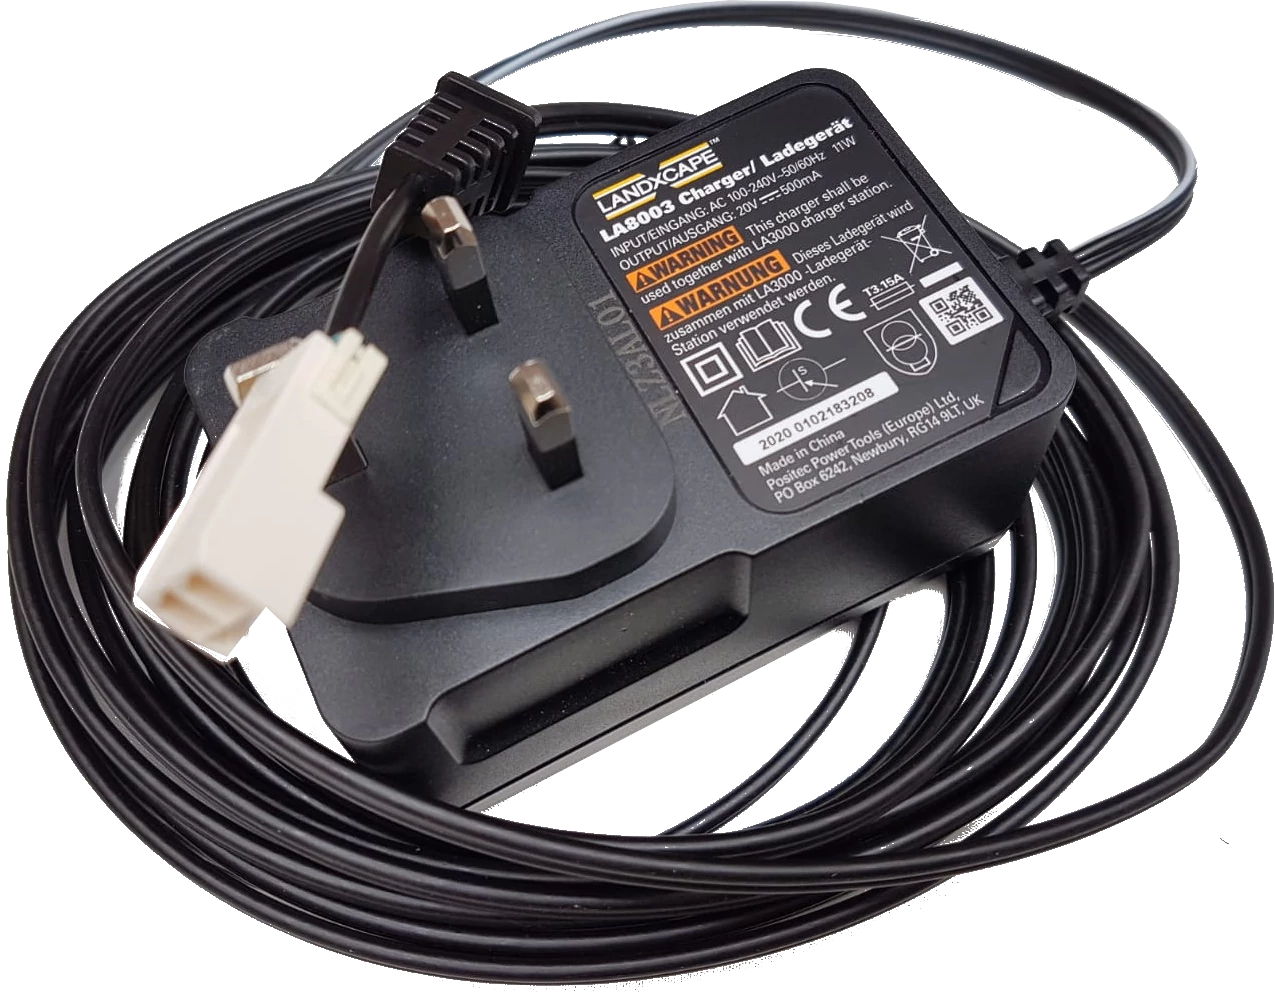 Charger for MacAllister robotic mower charging station